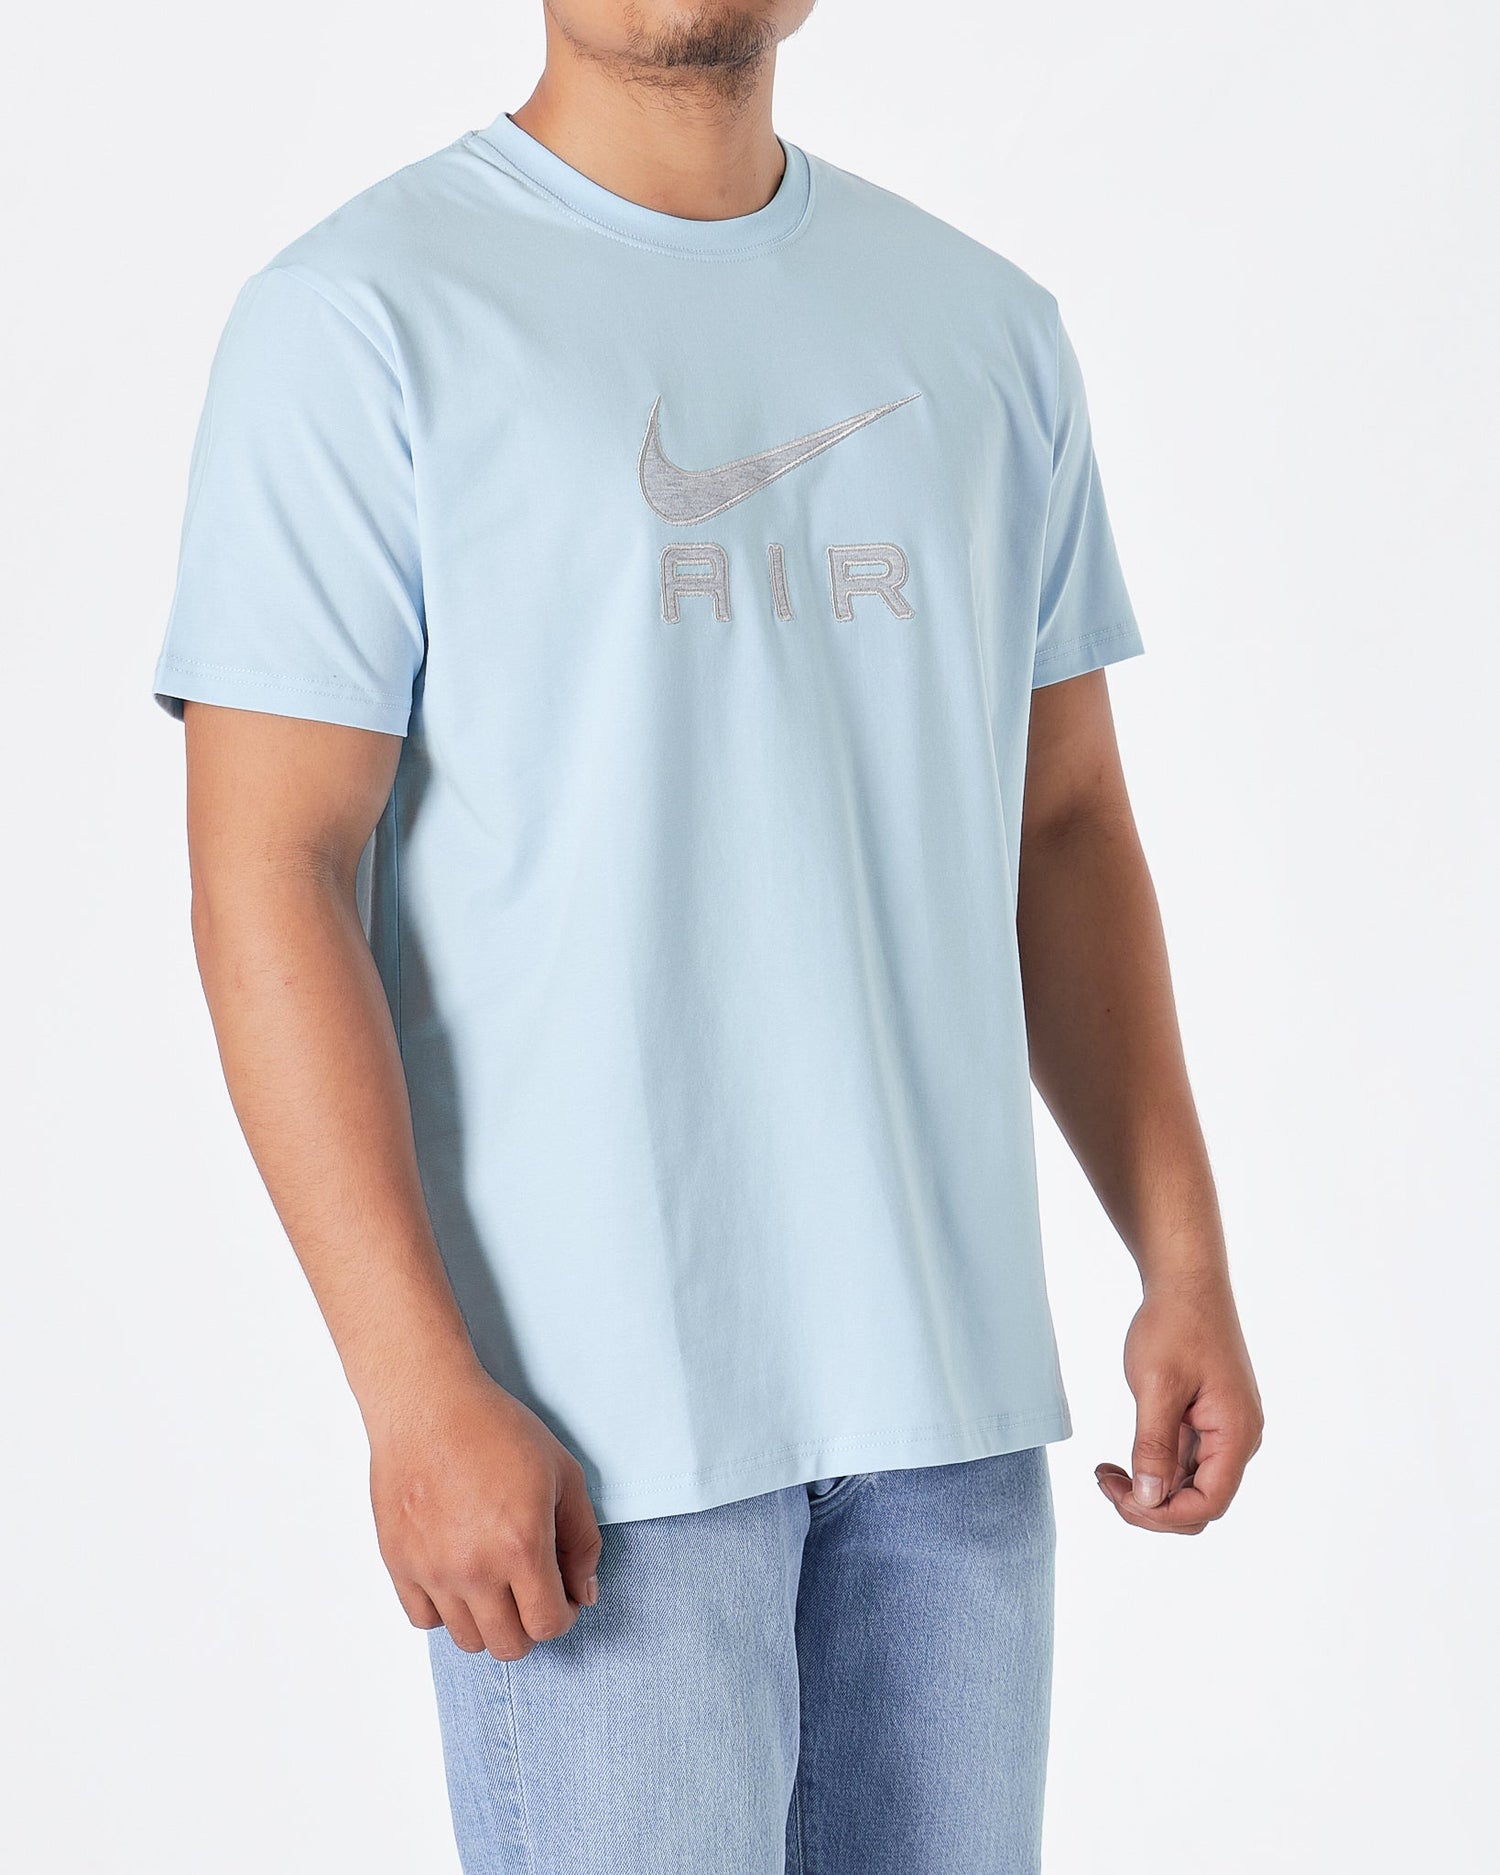 MOI OUTFIT-NIK Air Embroidered Men Blue T-Shirt 16.90